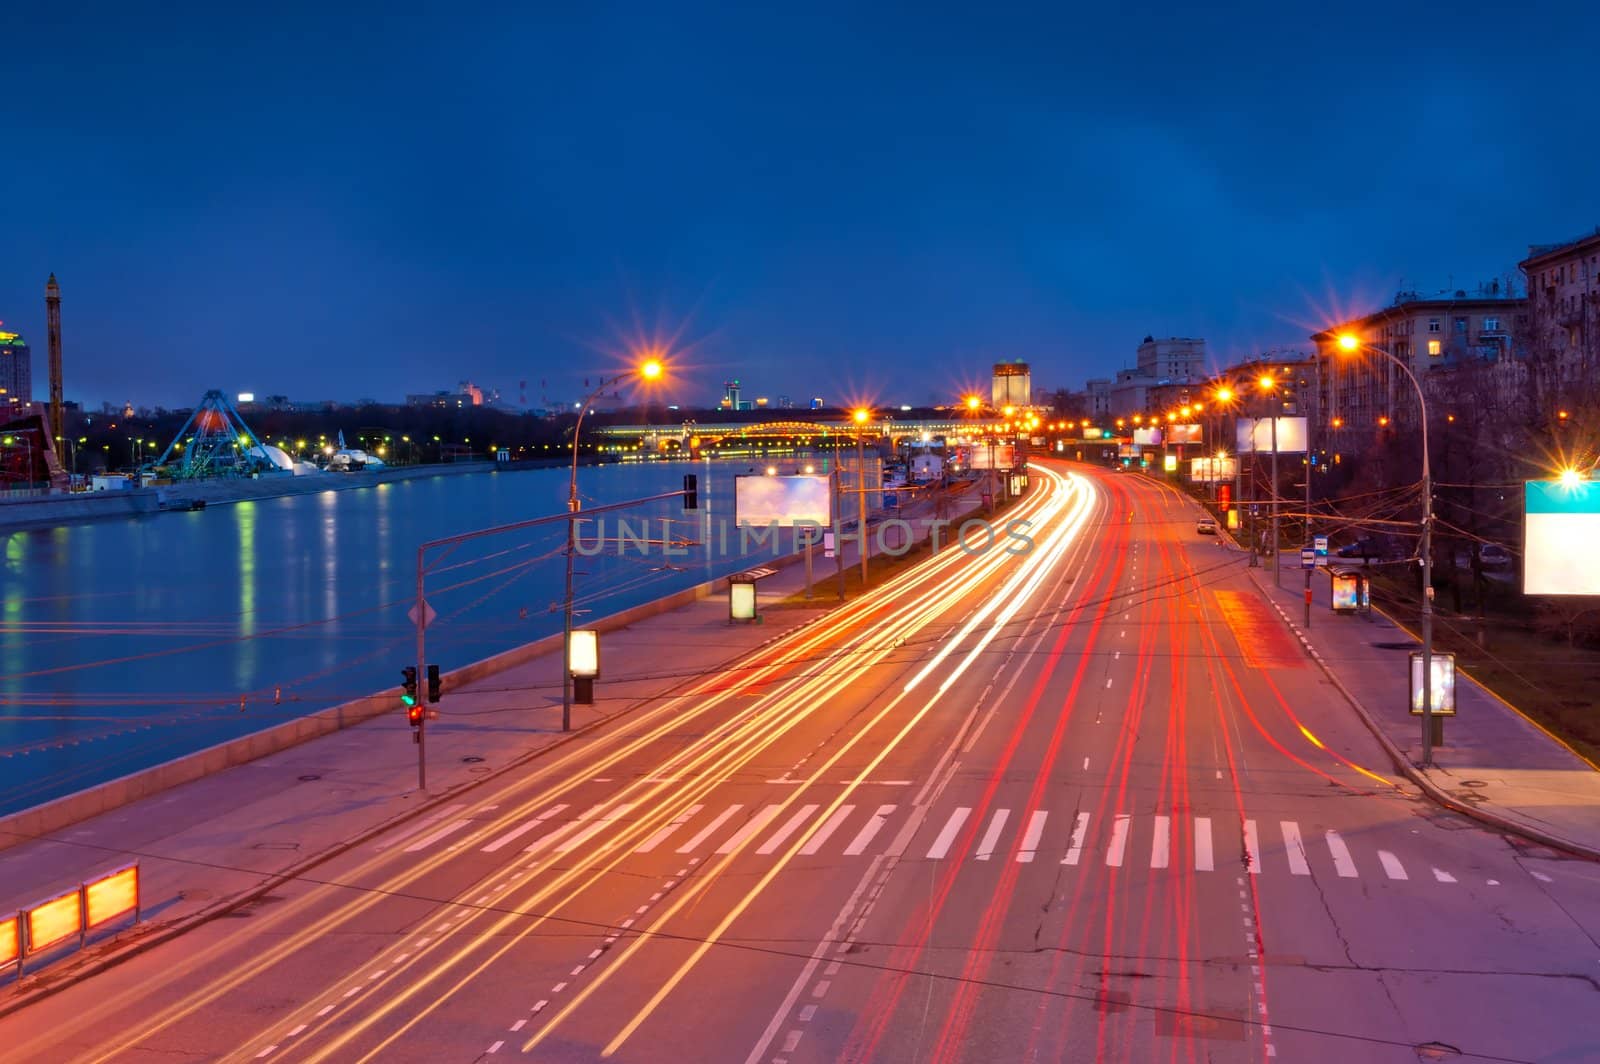 lights from the headlights in motion blur postural evening. Frundzenskaya embankment of the Moscow River. Moscow.